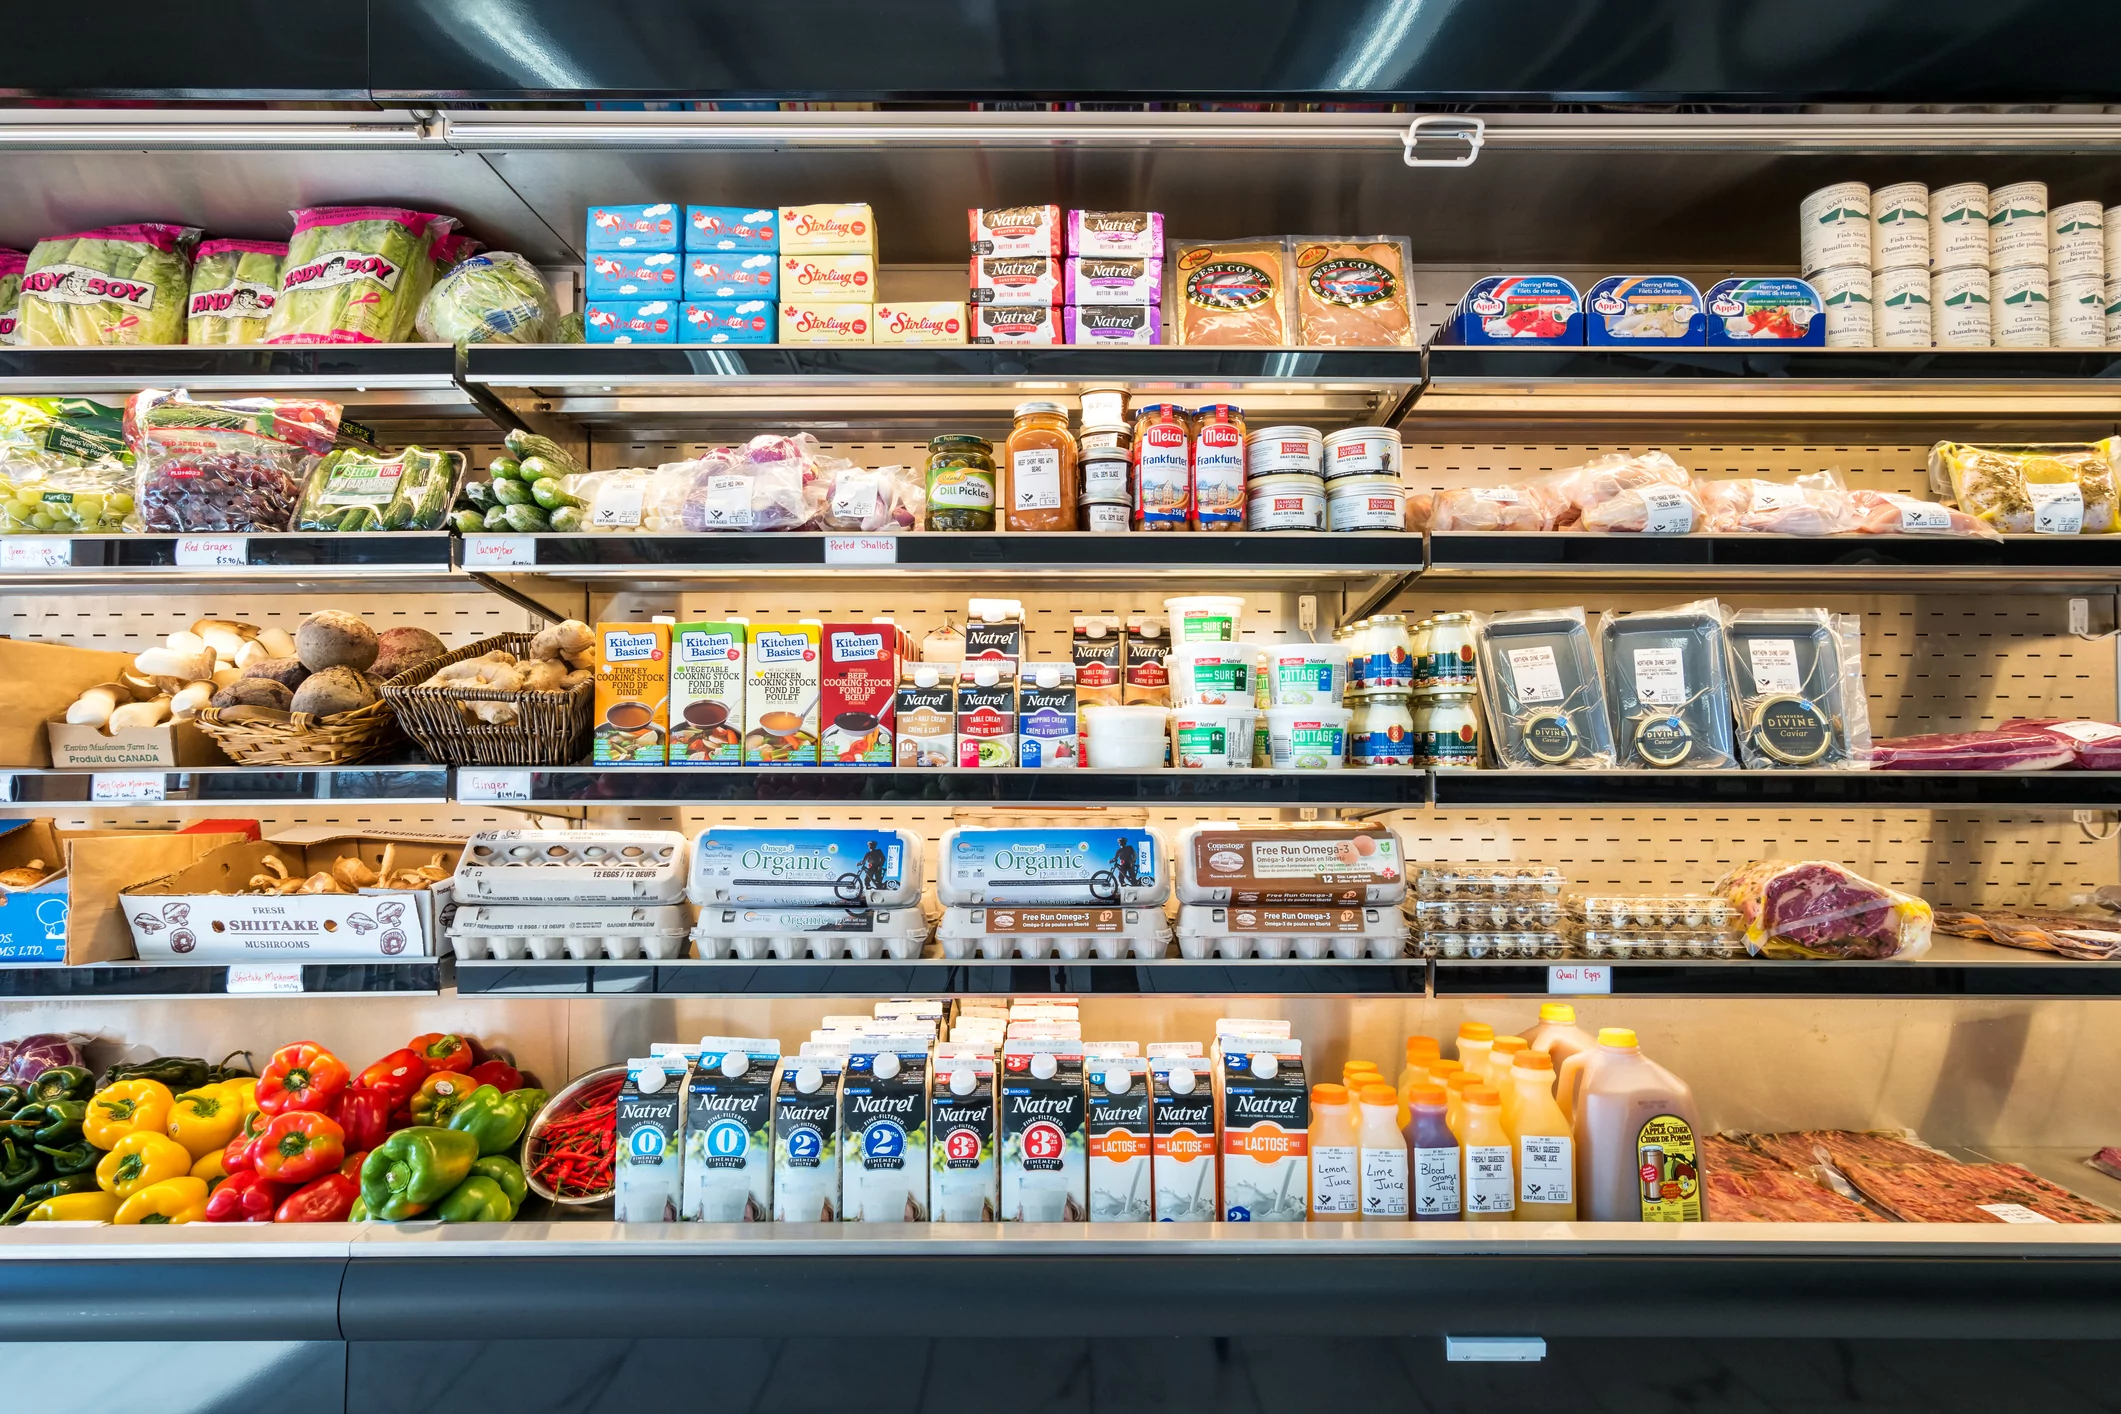 refrigerator shelves in a grocery delicatessen store